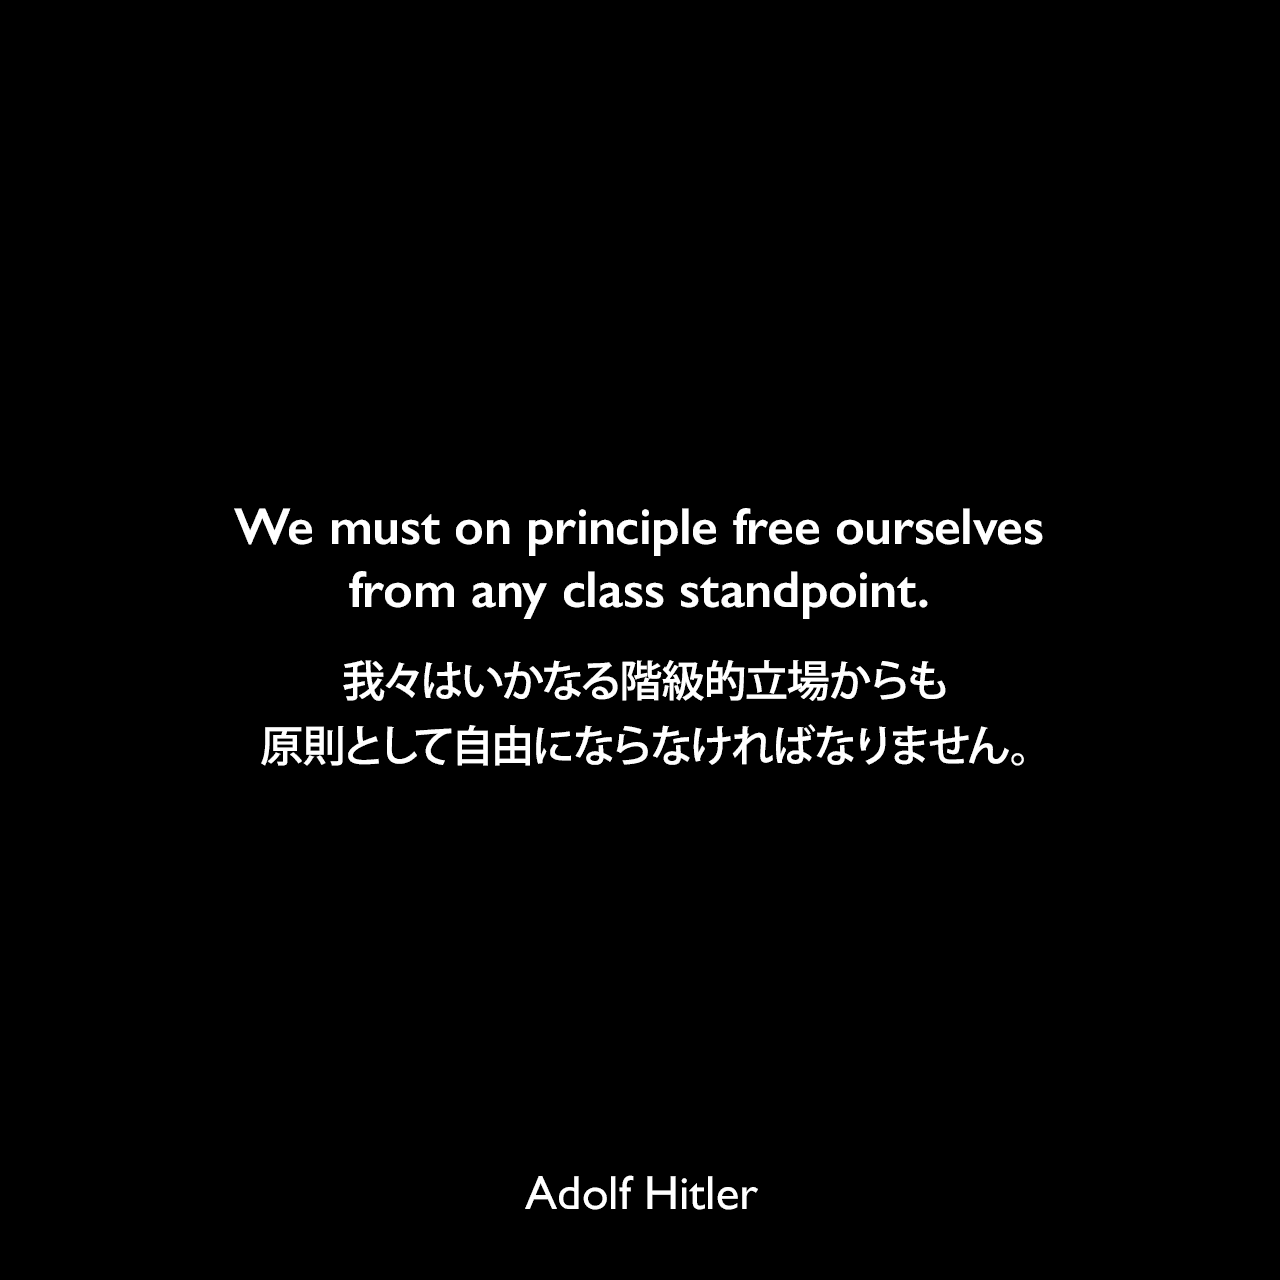 We must on principle free ourselves from any class standpoint.我々はいかなる階級的立場からも原則として自由にならなければなりません。- 1922年4月12日ミュンヘンでのスピーチよりAdolf Hitler